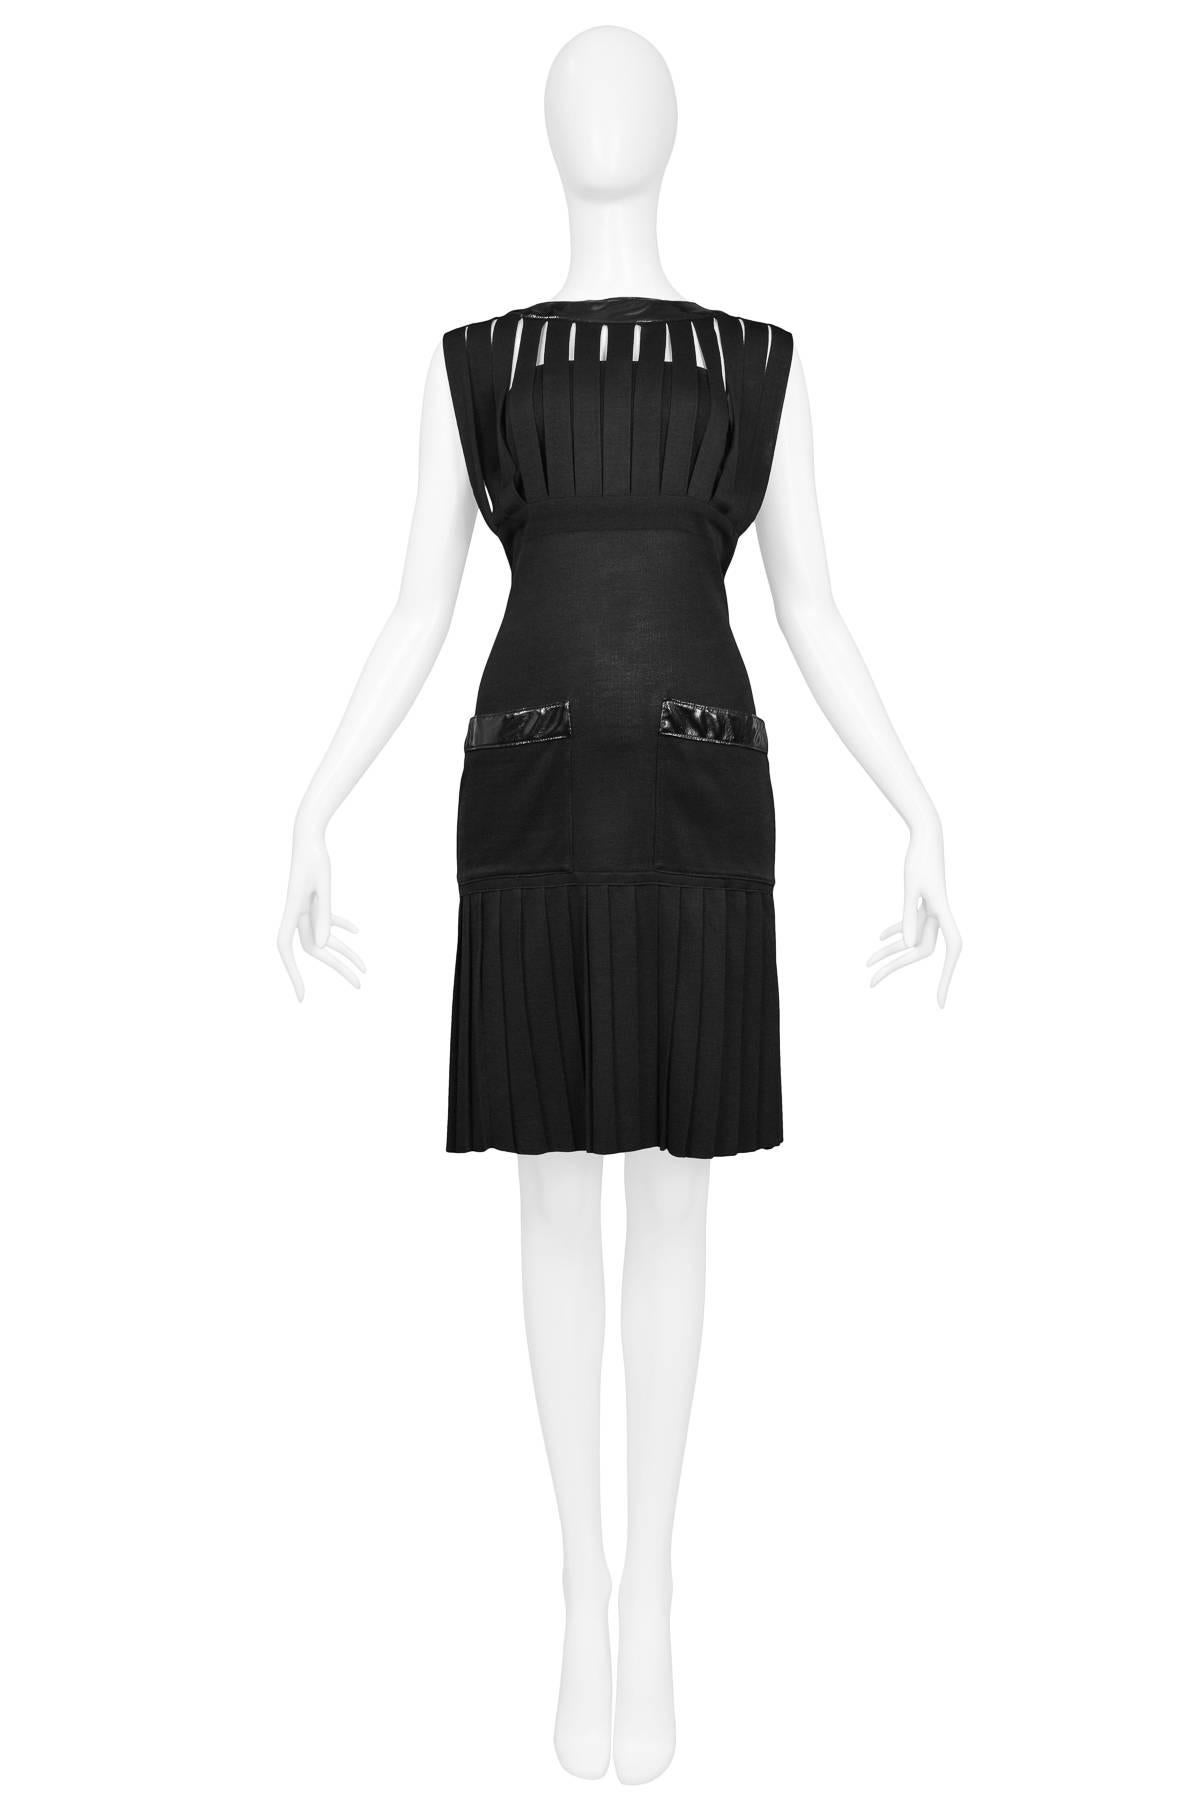 Vintage Chanel black knit cocktail dress with multi-strap bodice, pleated skirt, black patent leather trim and CC buttons at back. 

Size: 4/6